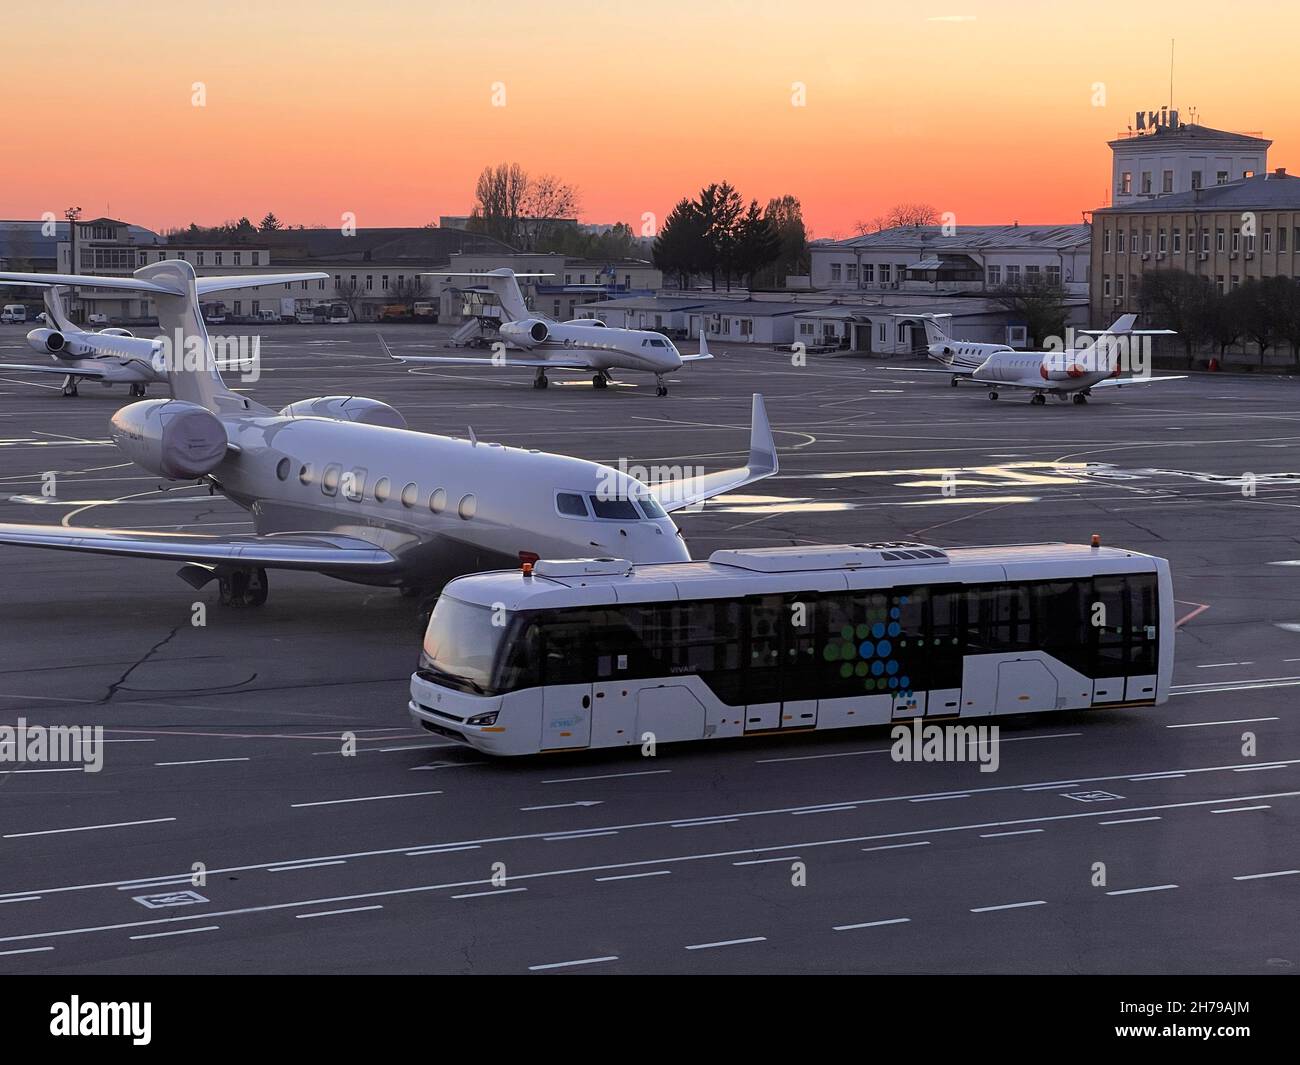 Igor Sikorsky Kyiv International Airport Zhuliany is one of the two passenger airports of the Ukrainian capital Kyiv, the other being Boryspil Interna Stock Photo